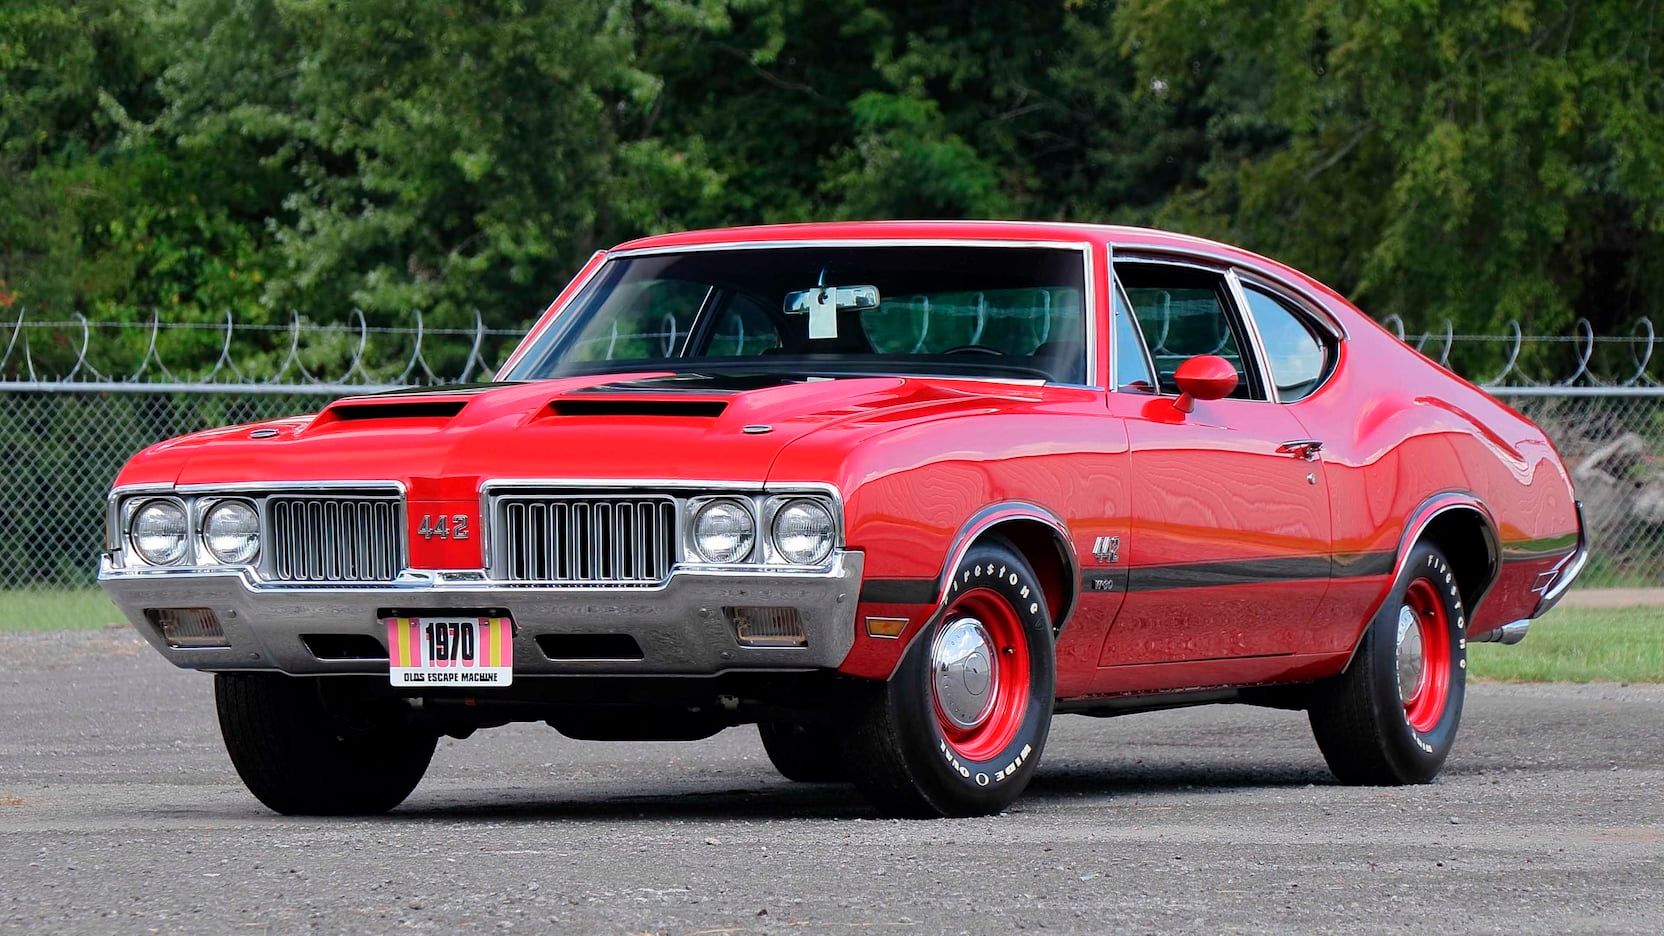 A parked 1970 Olds 442 W30